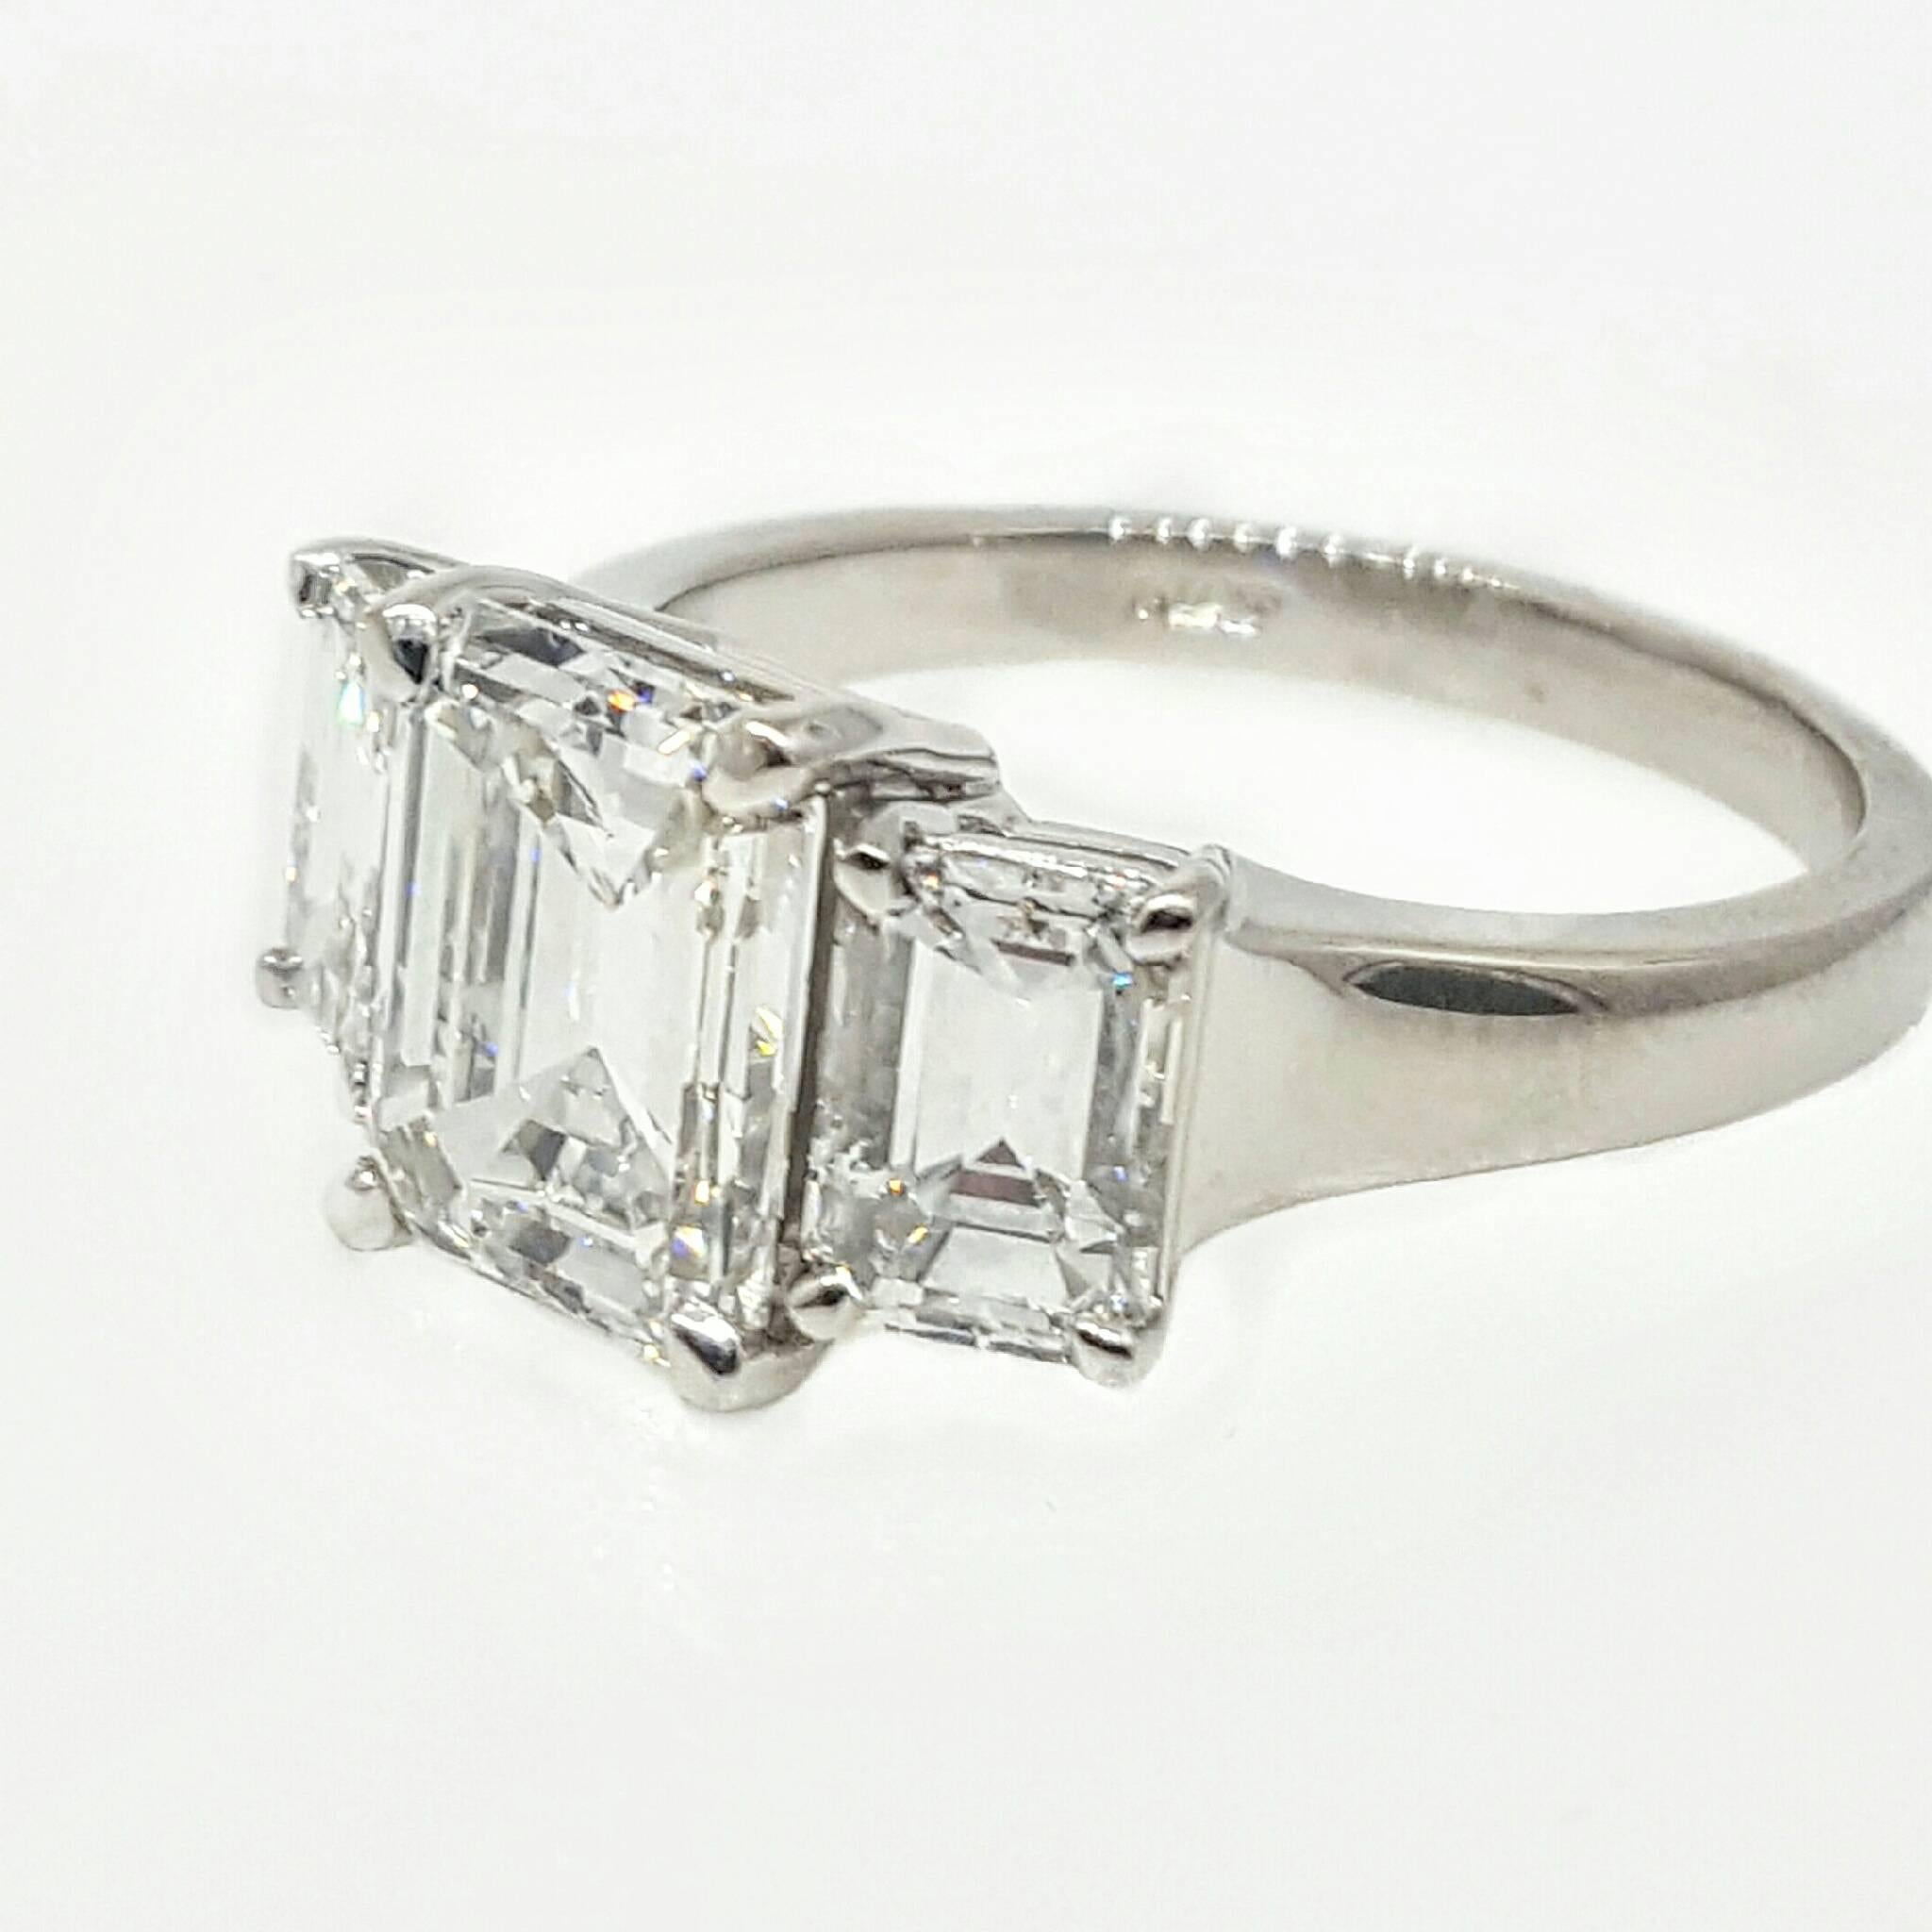 A hand made platinum mounting set with three rectangular emerald cut diamonds. The center diamond weighs 2.84 carats exactly, is G color, VS1 clarity and certified by the GIA. The side diamonds weigh 0.90ct each, are G color, VS2 clarity bringing